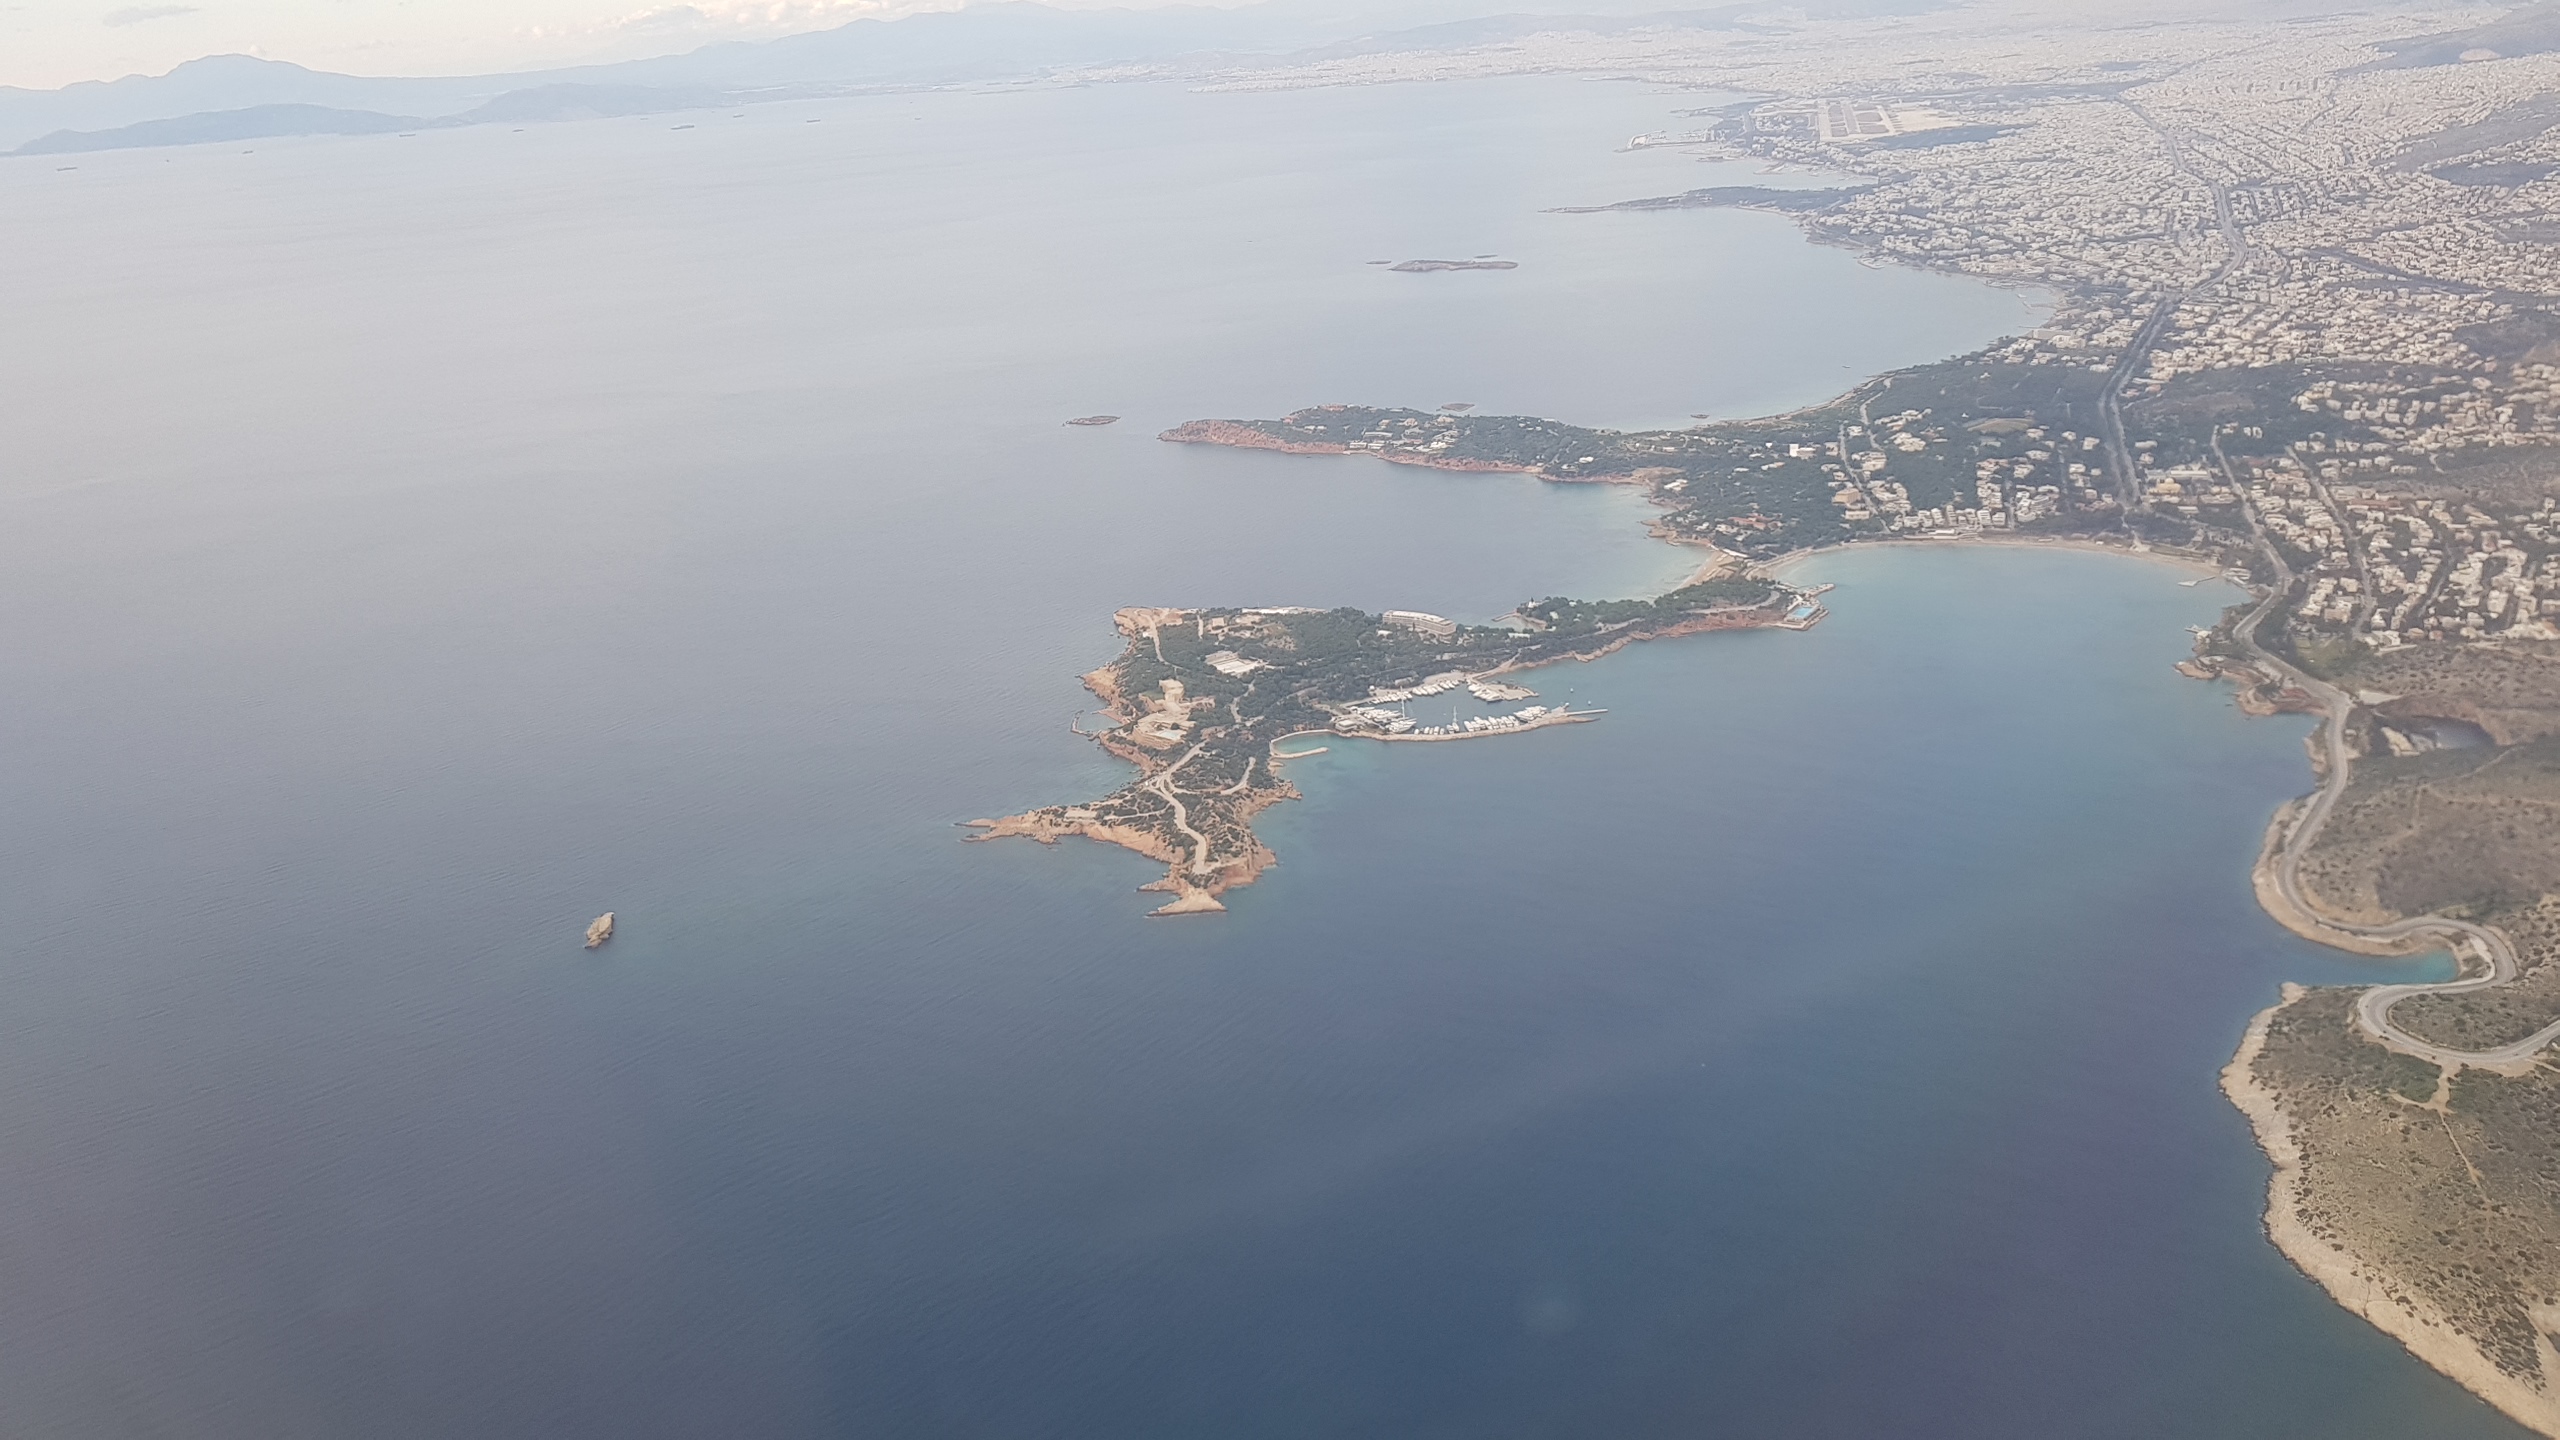 Approaching Athens, the old airport (Helliniko) is visible as well